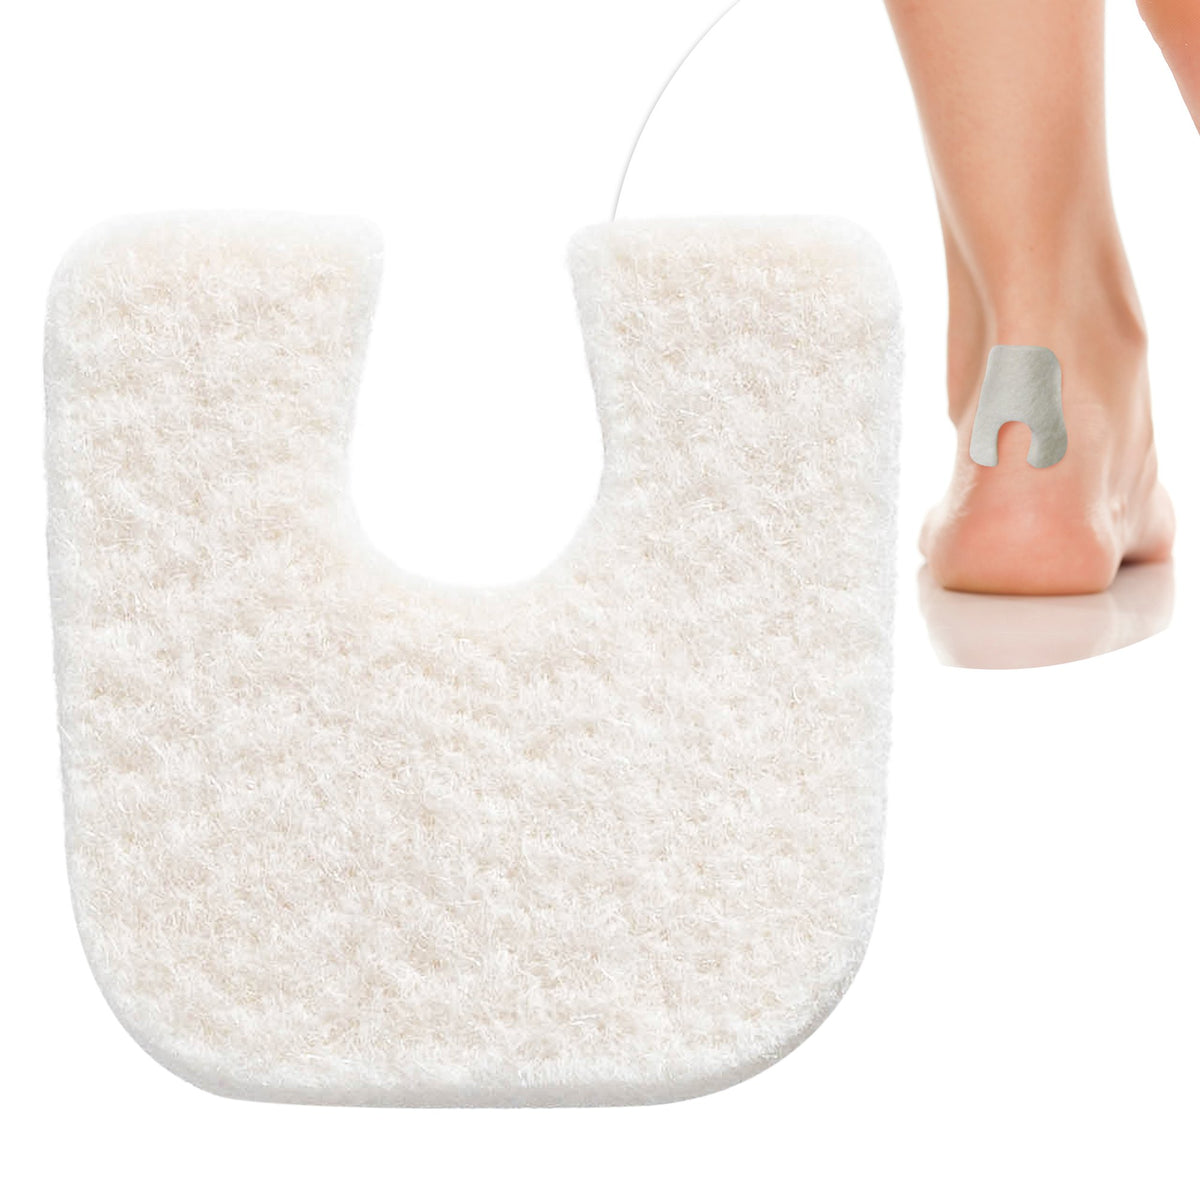 U Shaped Felt Callus Pads - Adhesive Foot Pads That Protect Calluses from Rubbing On Shoes - 3/16"